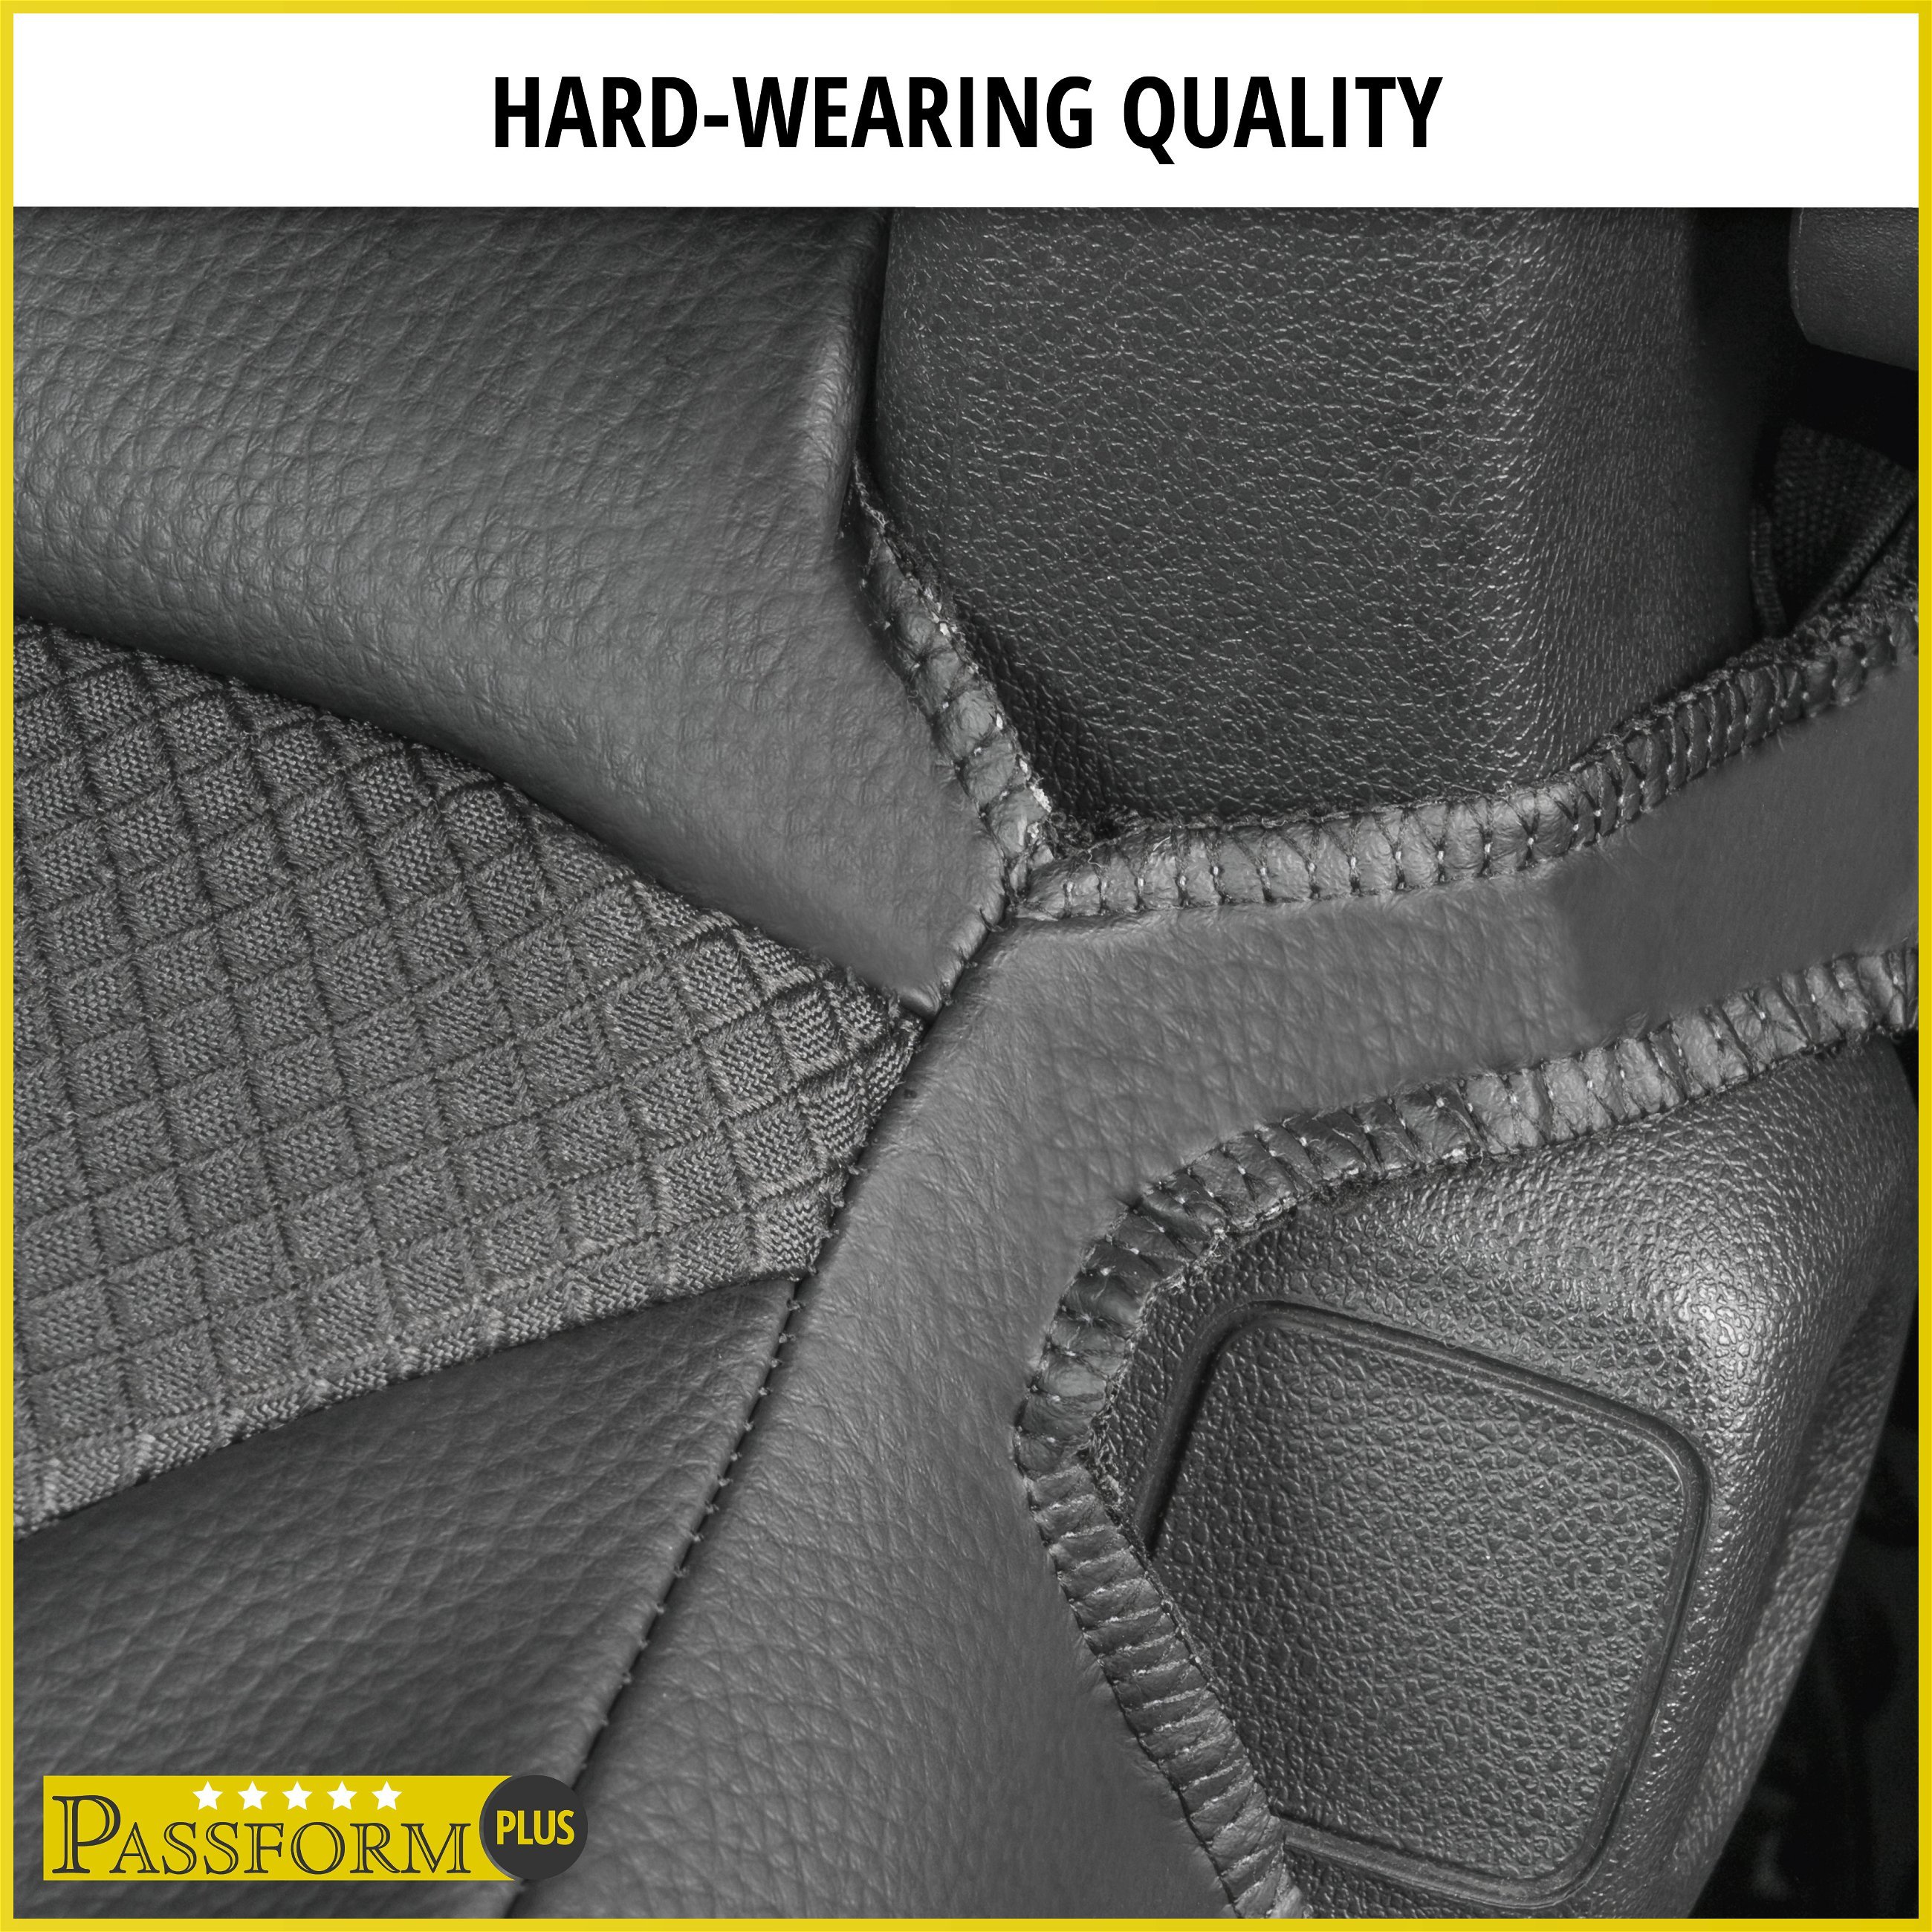 Premium Seat Cover for Mercedes-Benz Sprinter 06/2006-Today, 1 single seat cover front + armrest cover, 1 double bench cover